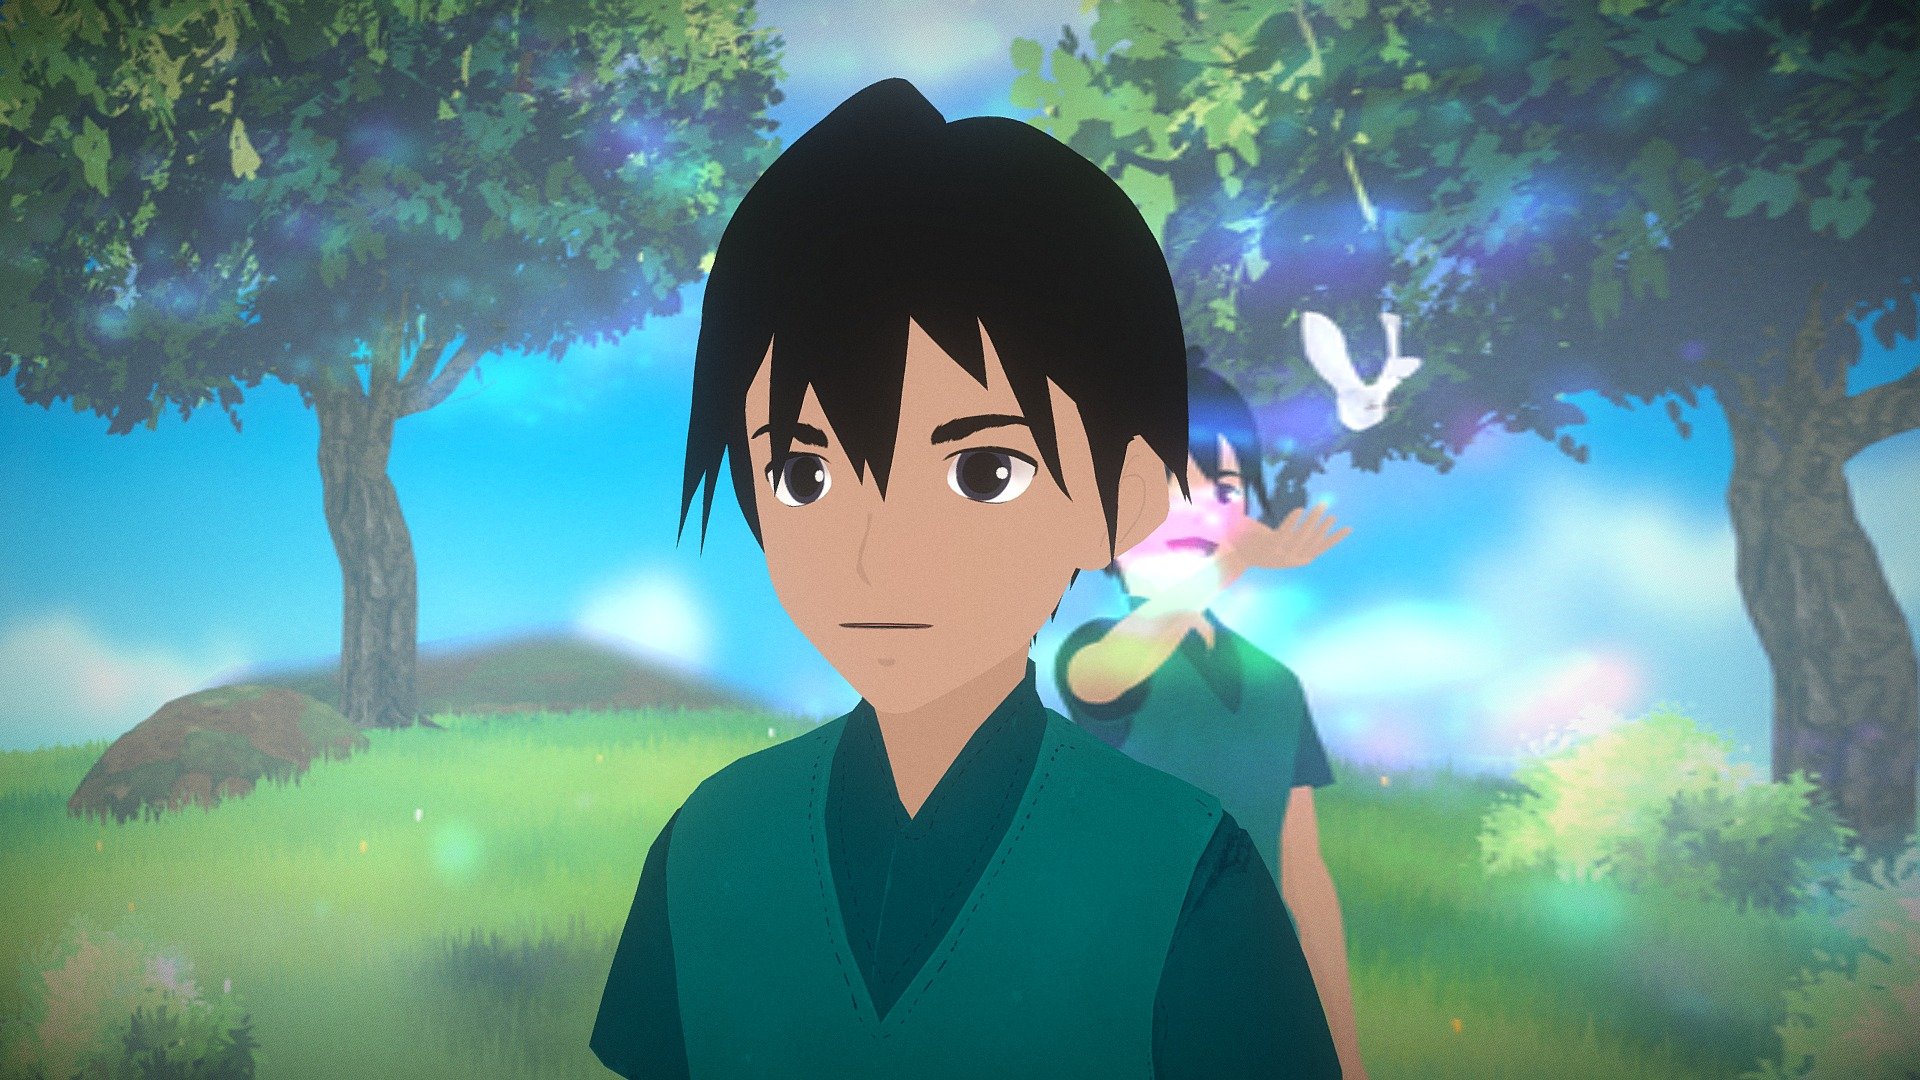 Fully Rigged Ghibli style/Anime boy 
Ready for your game, animations and any graphic design you may need - Anime/Ghibli style Boy - 3D model by ahingel 3d model